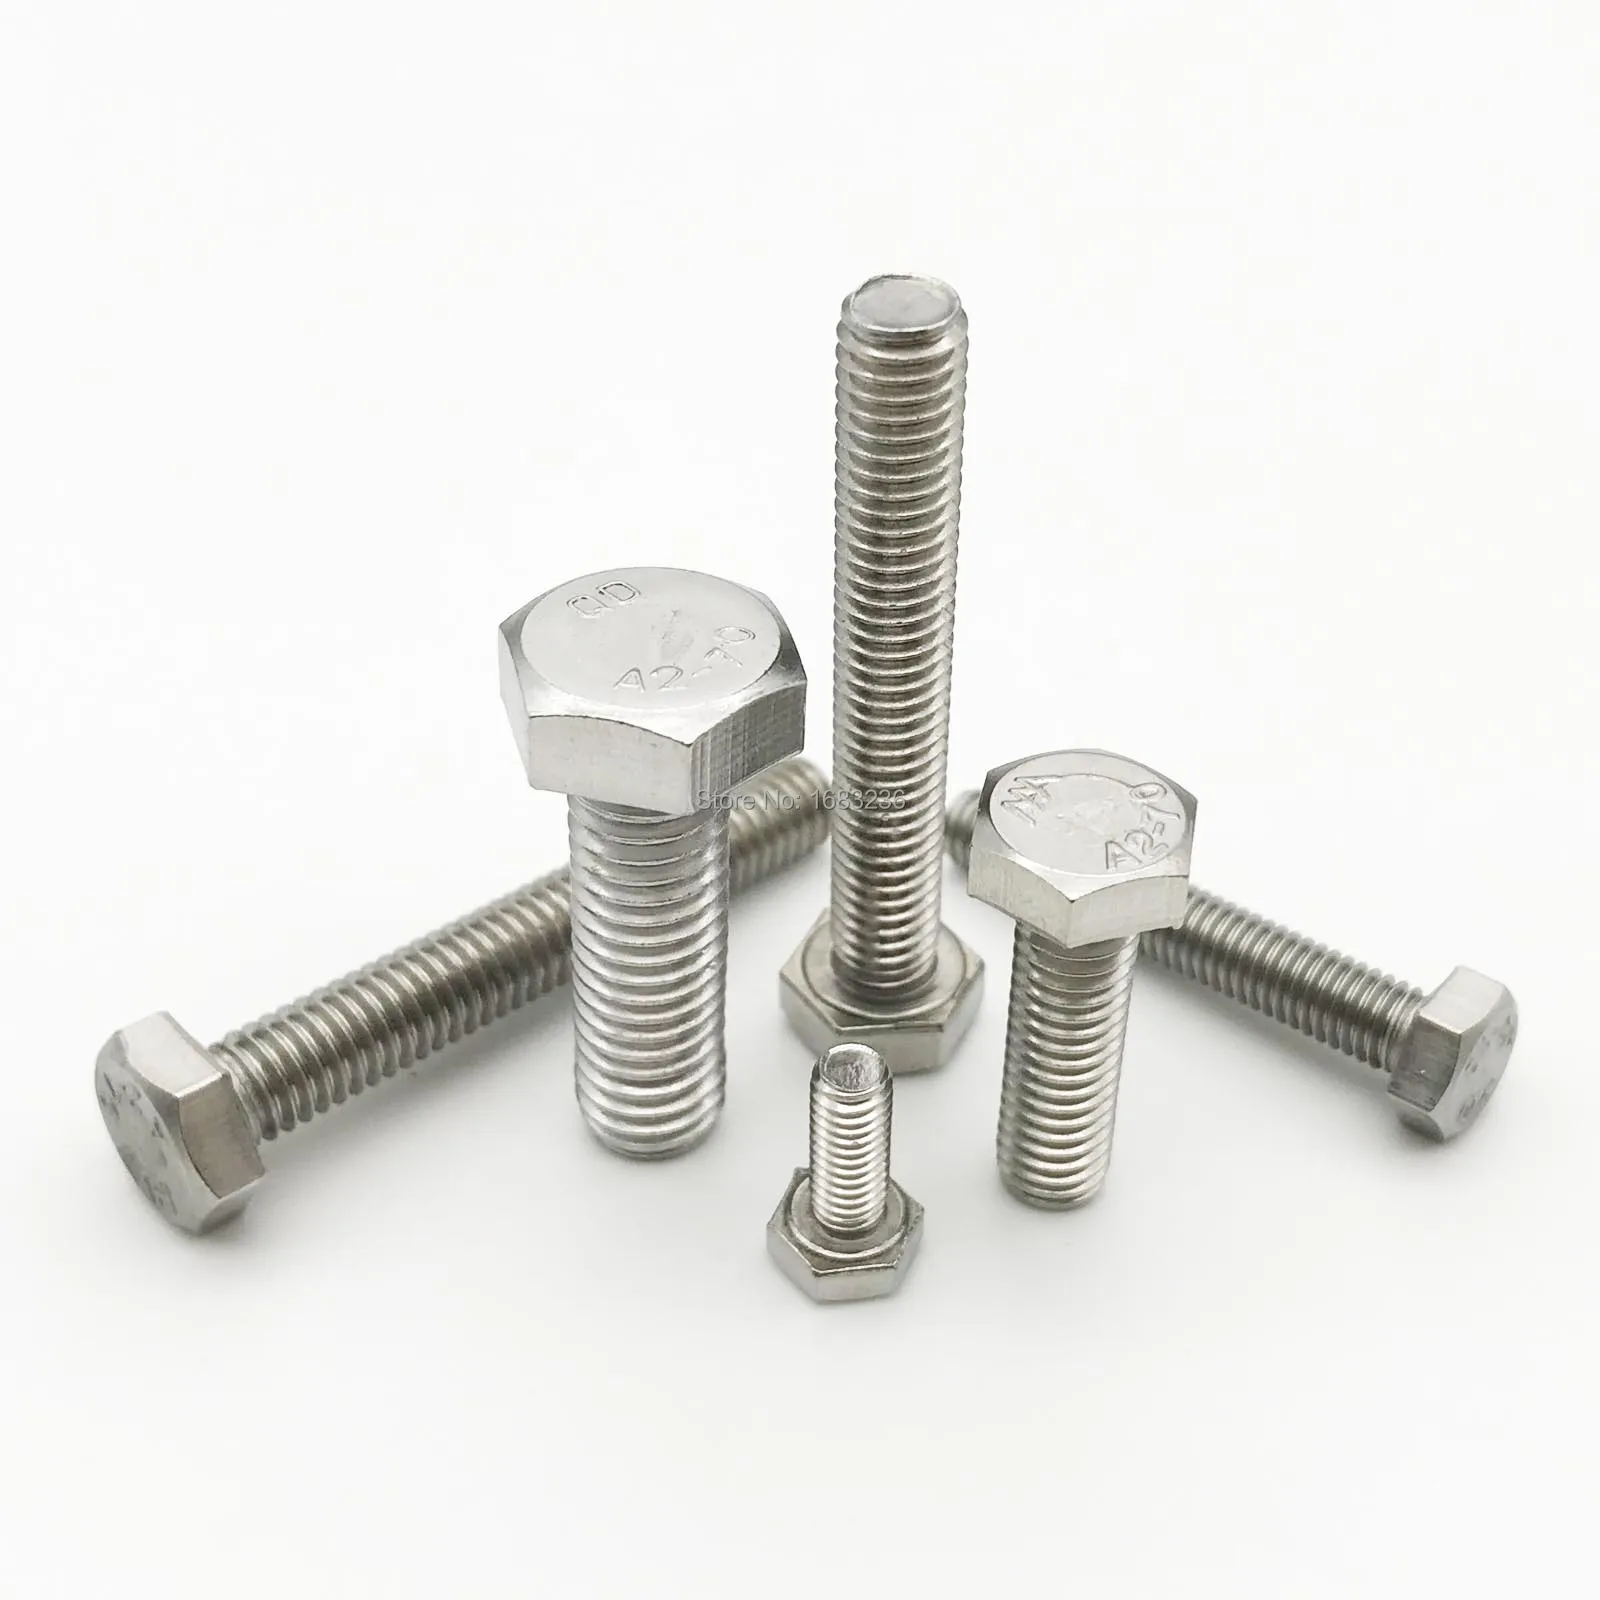 A2 Stainless Steel Hex Hexagon Head Set Screw Bolts Fully Threaded M6 M8 